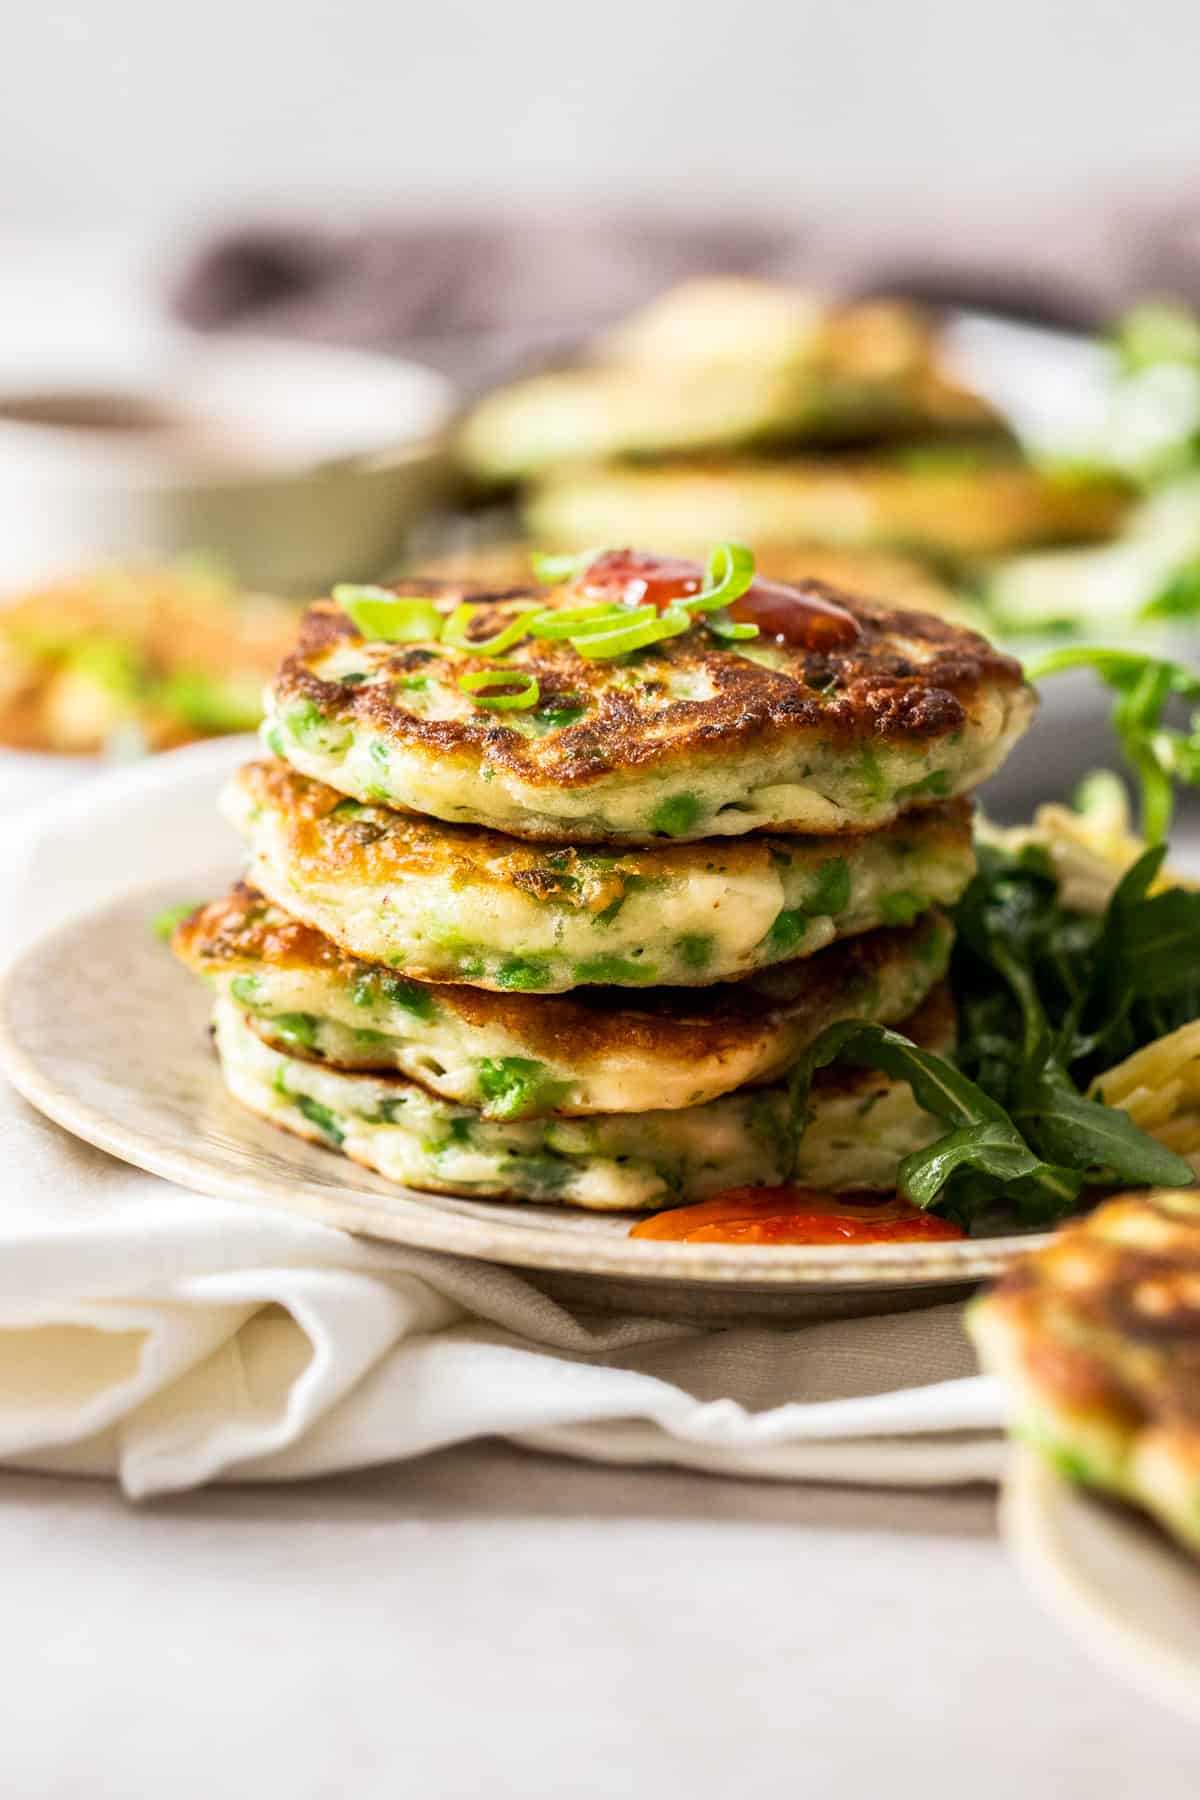 Stack of fritters on a plate, with some chilli sauce and rocket salad on the edge.